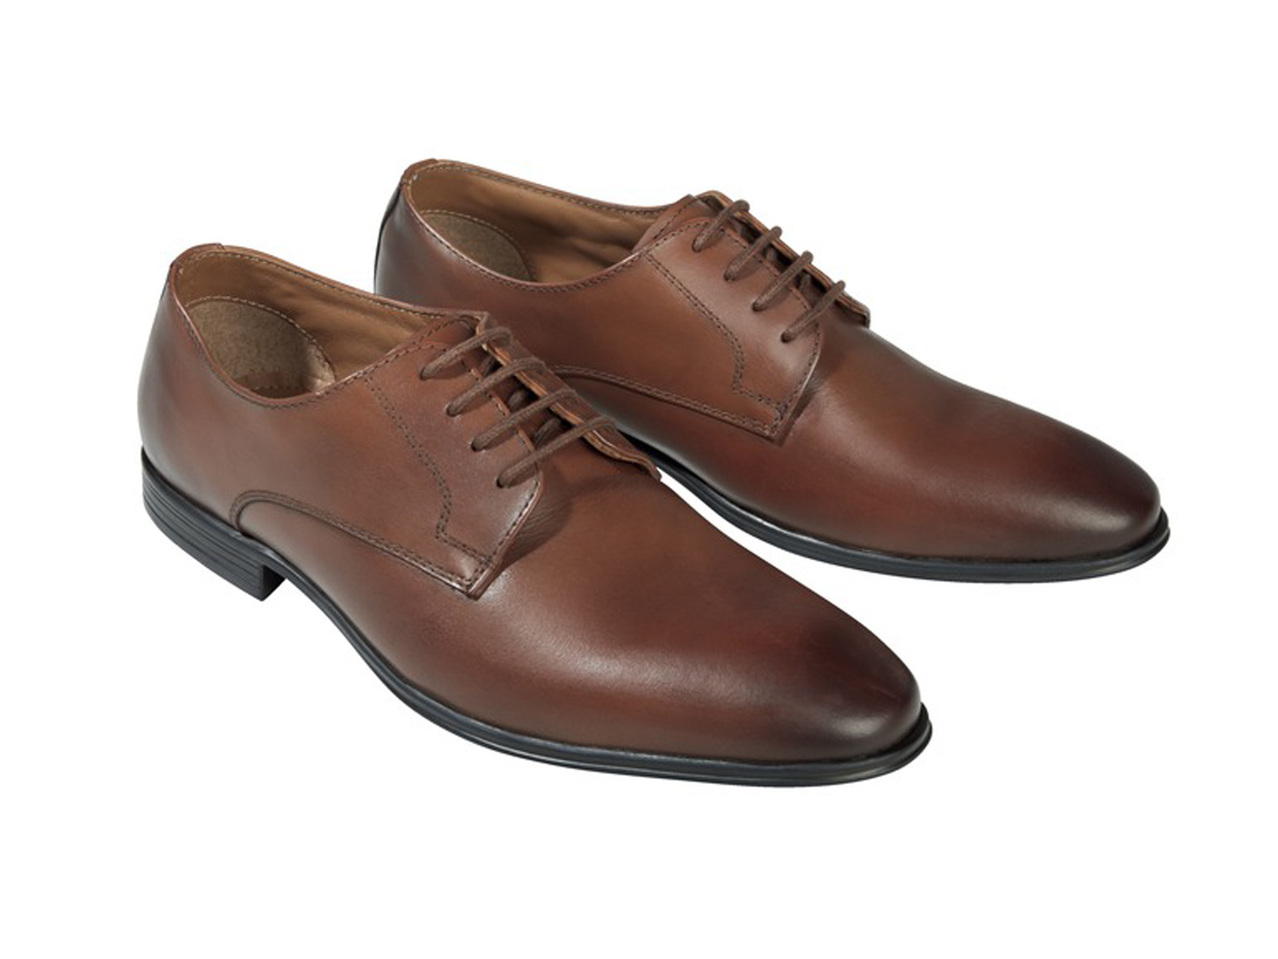 LIVERGY Men's Leather Business Shoes